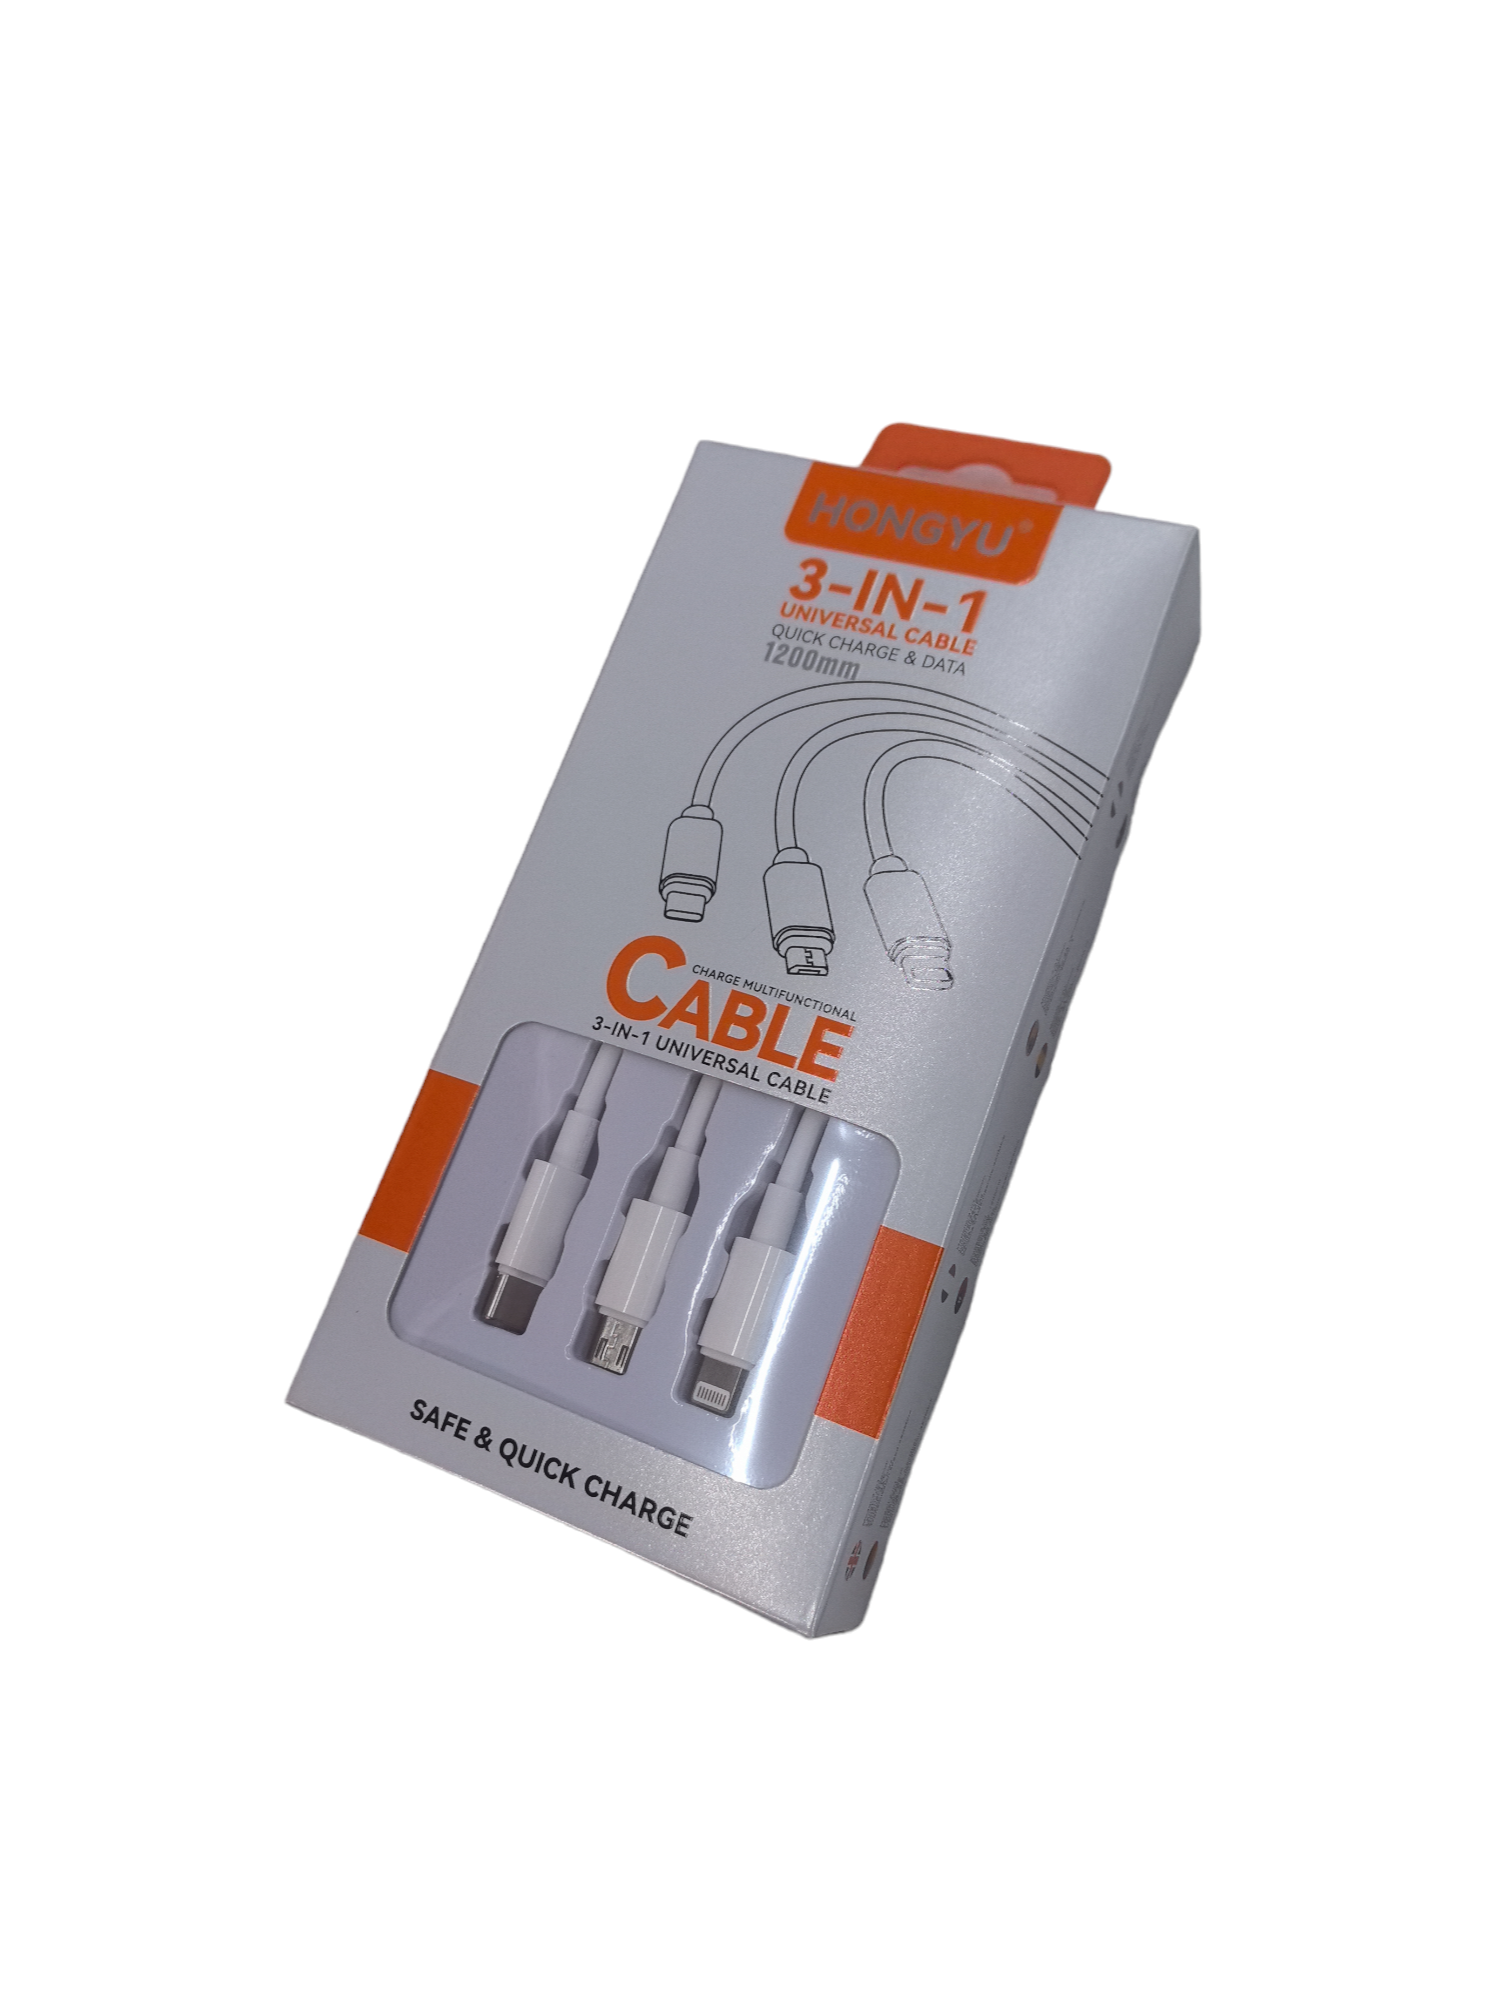 3-IN-1 charger cable (x12)